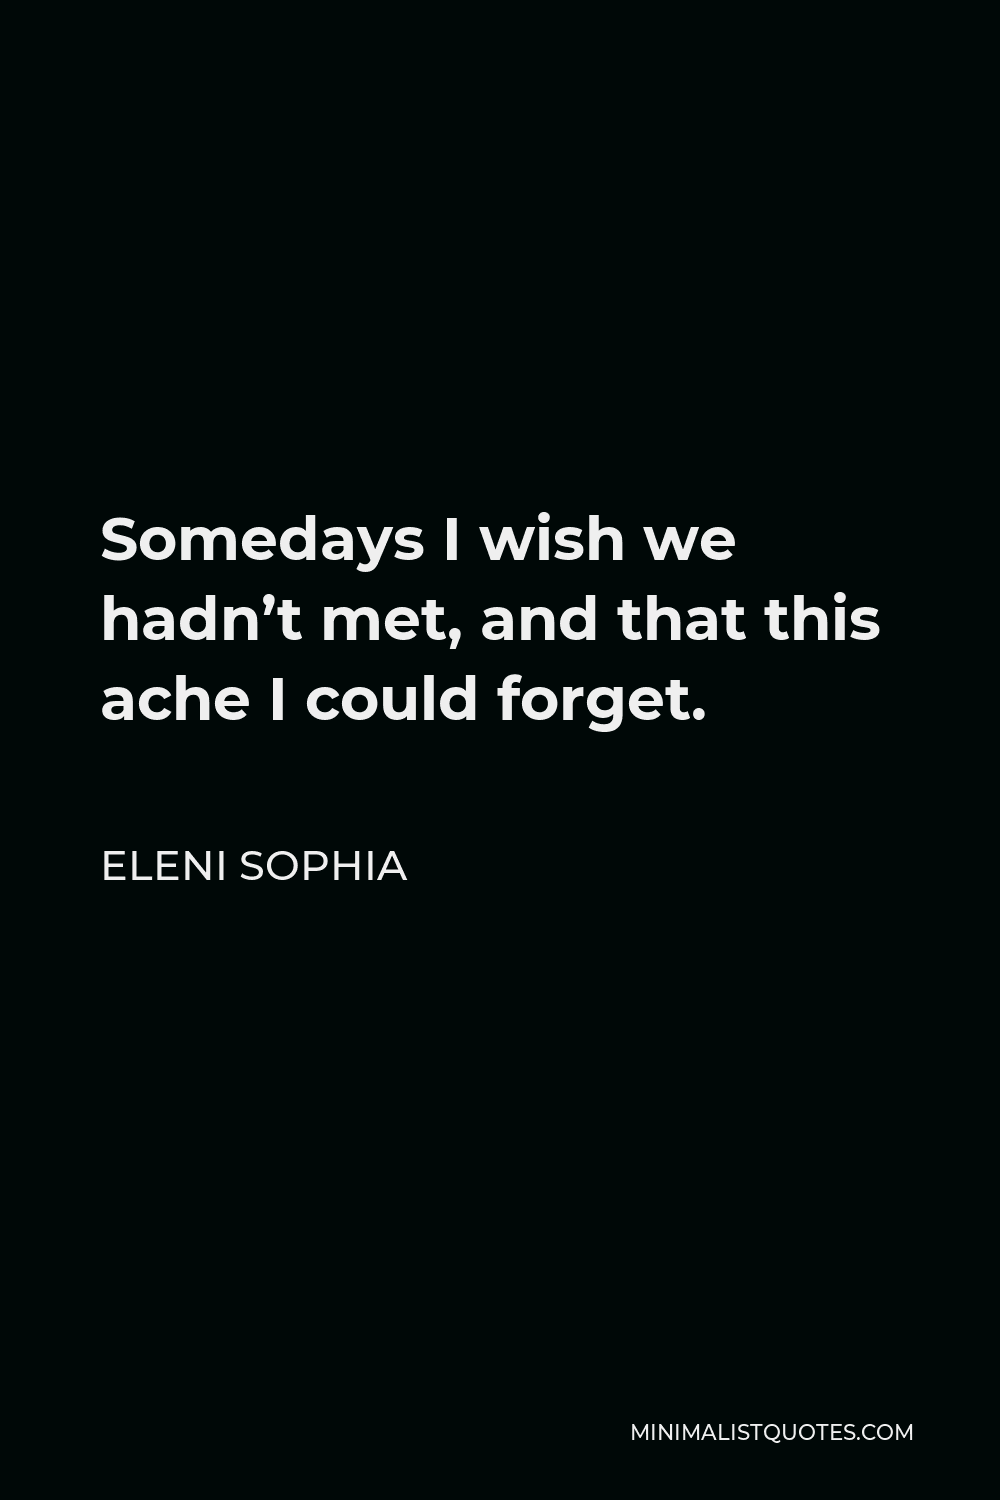 Eleni Sophia Quote - Somedays I wish we hadn’t met, and that this ache I could forget.